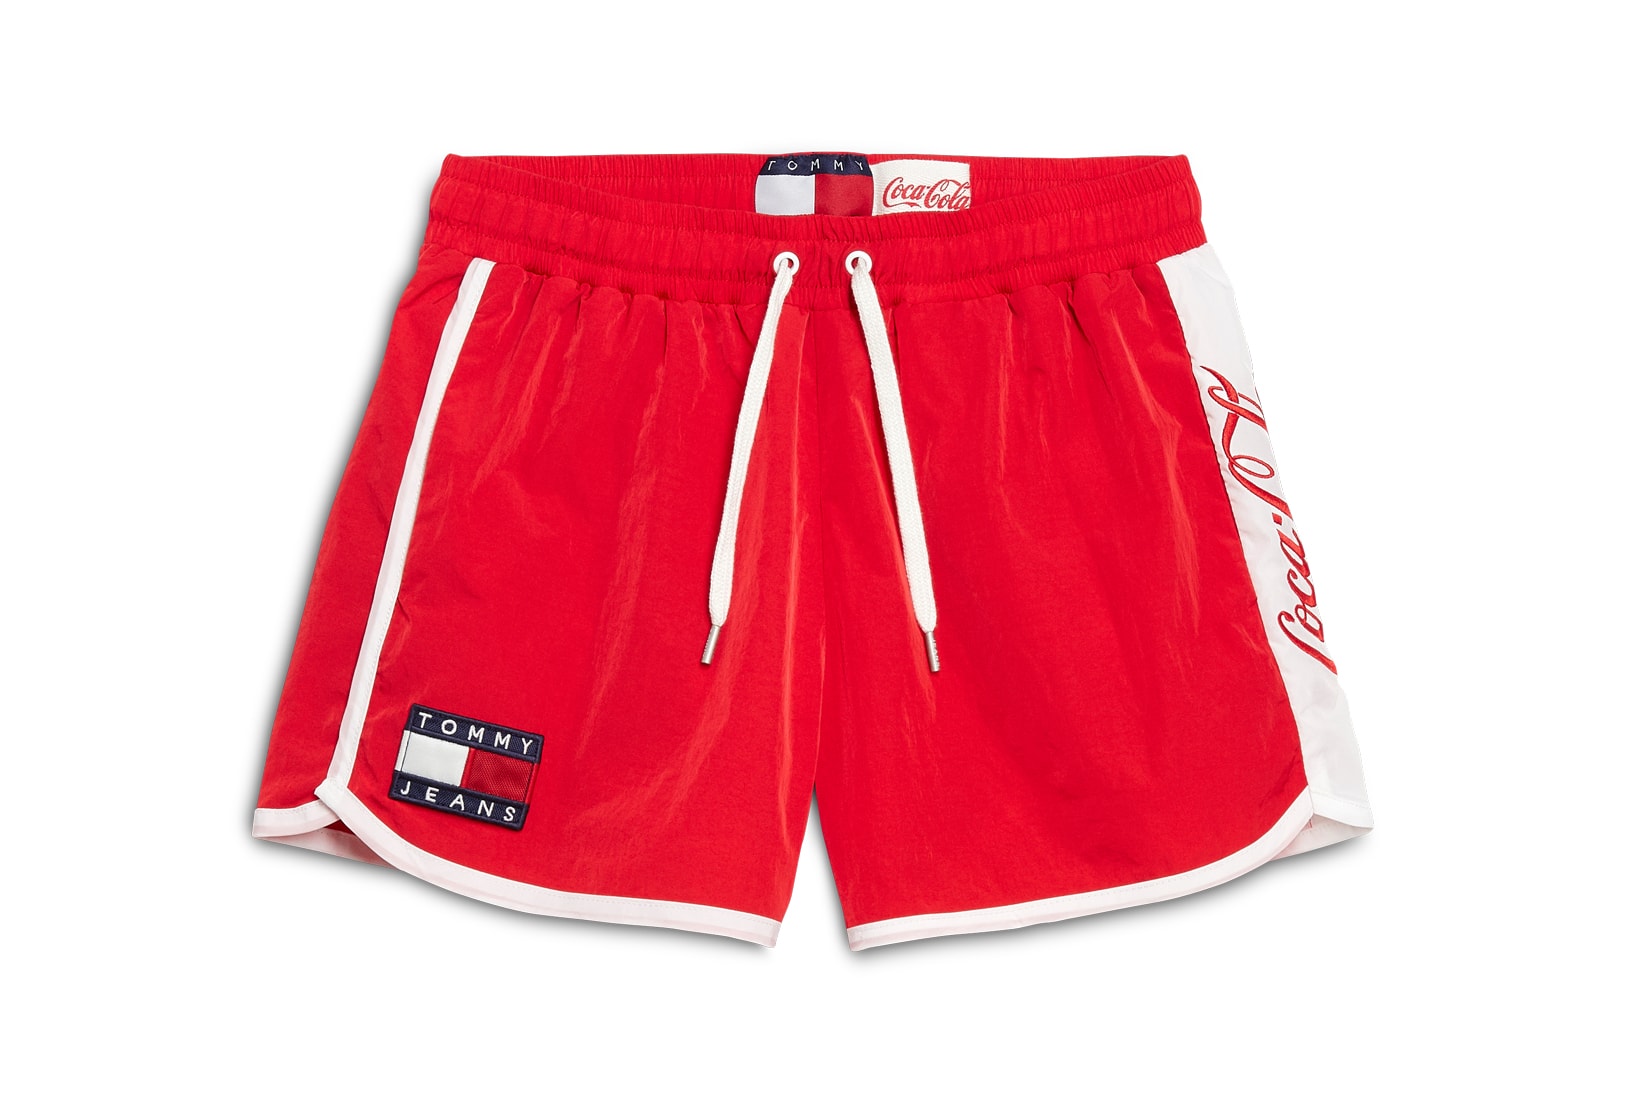 Coca-Cola x Tommy Jeans Capsule Collection Shorts Red